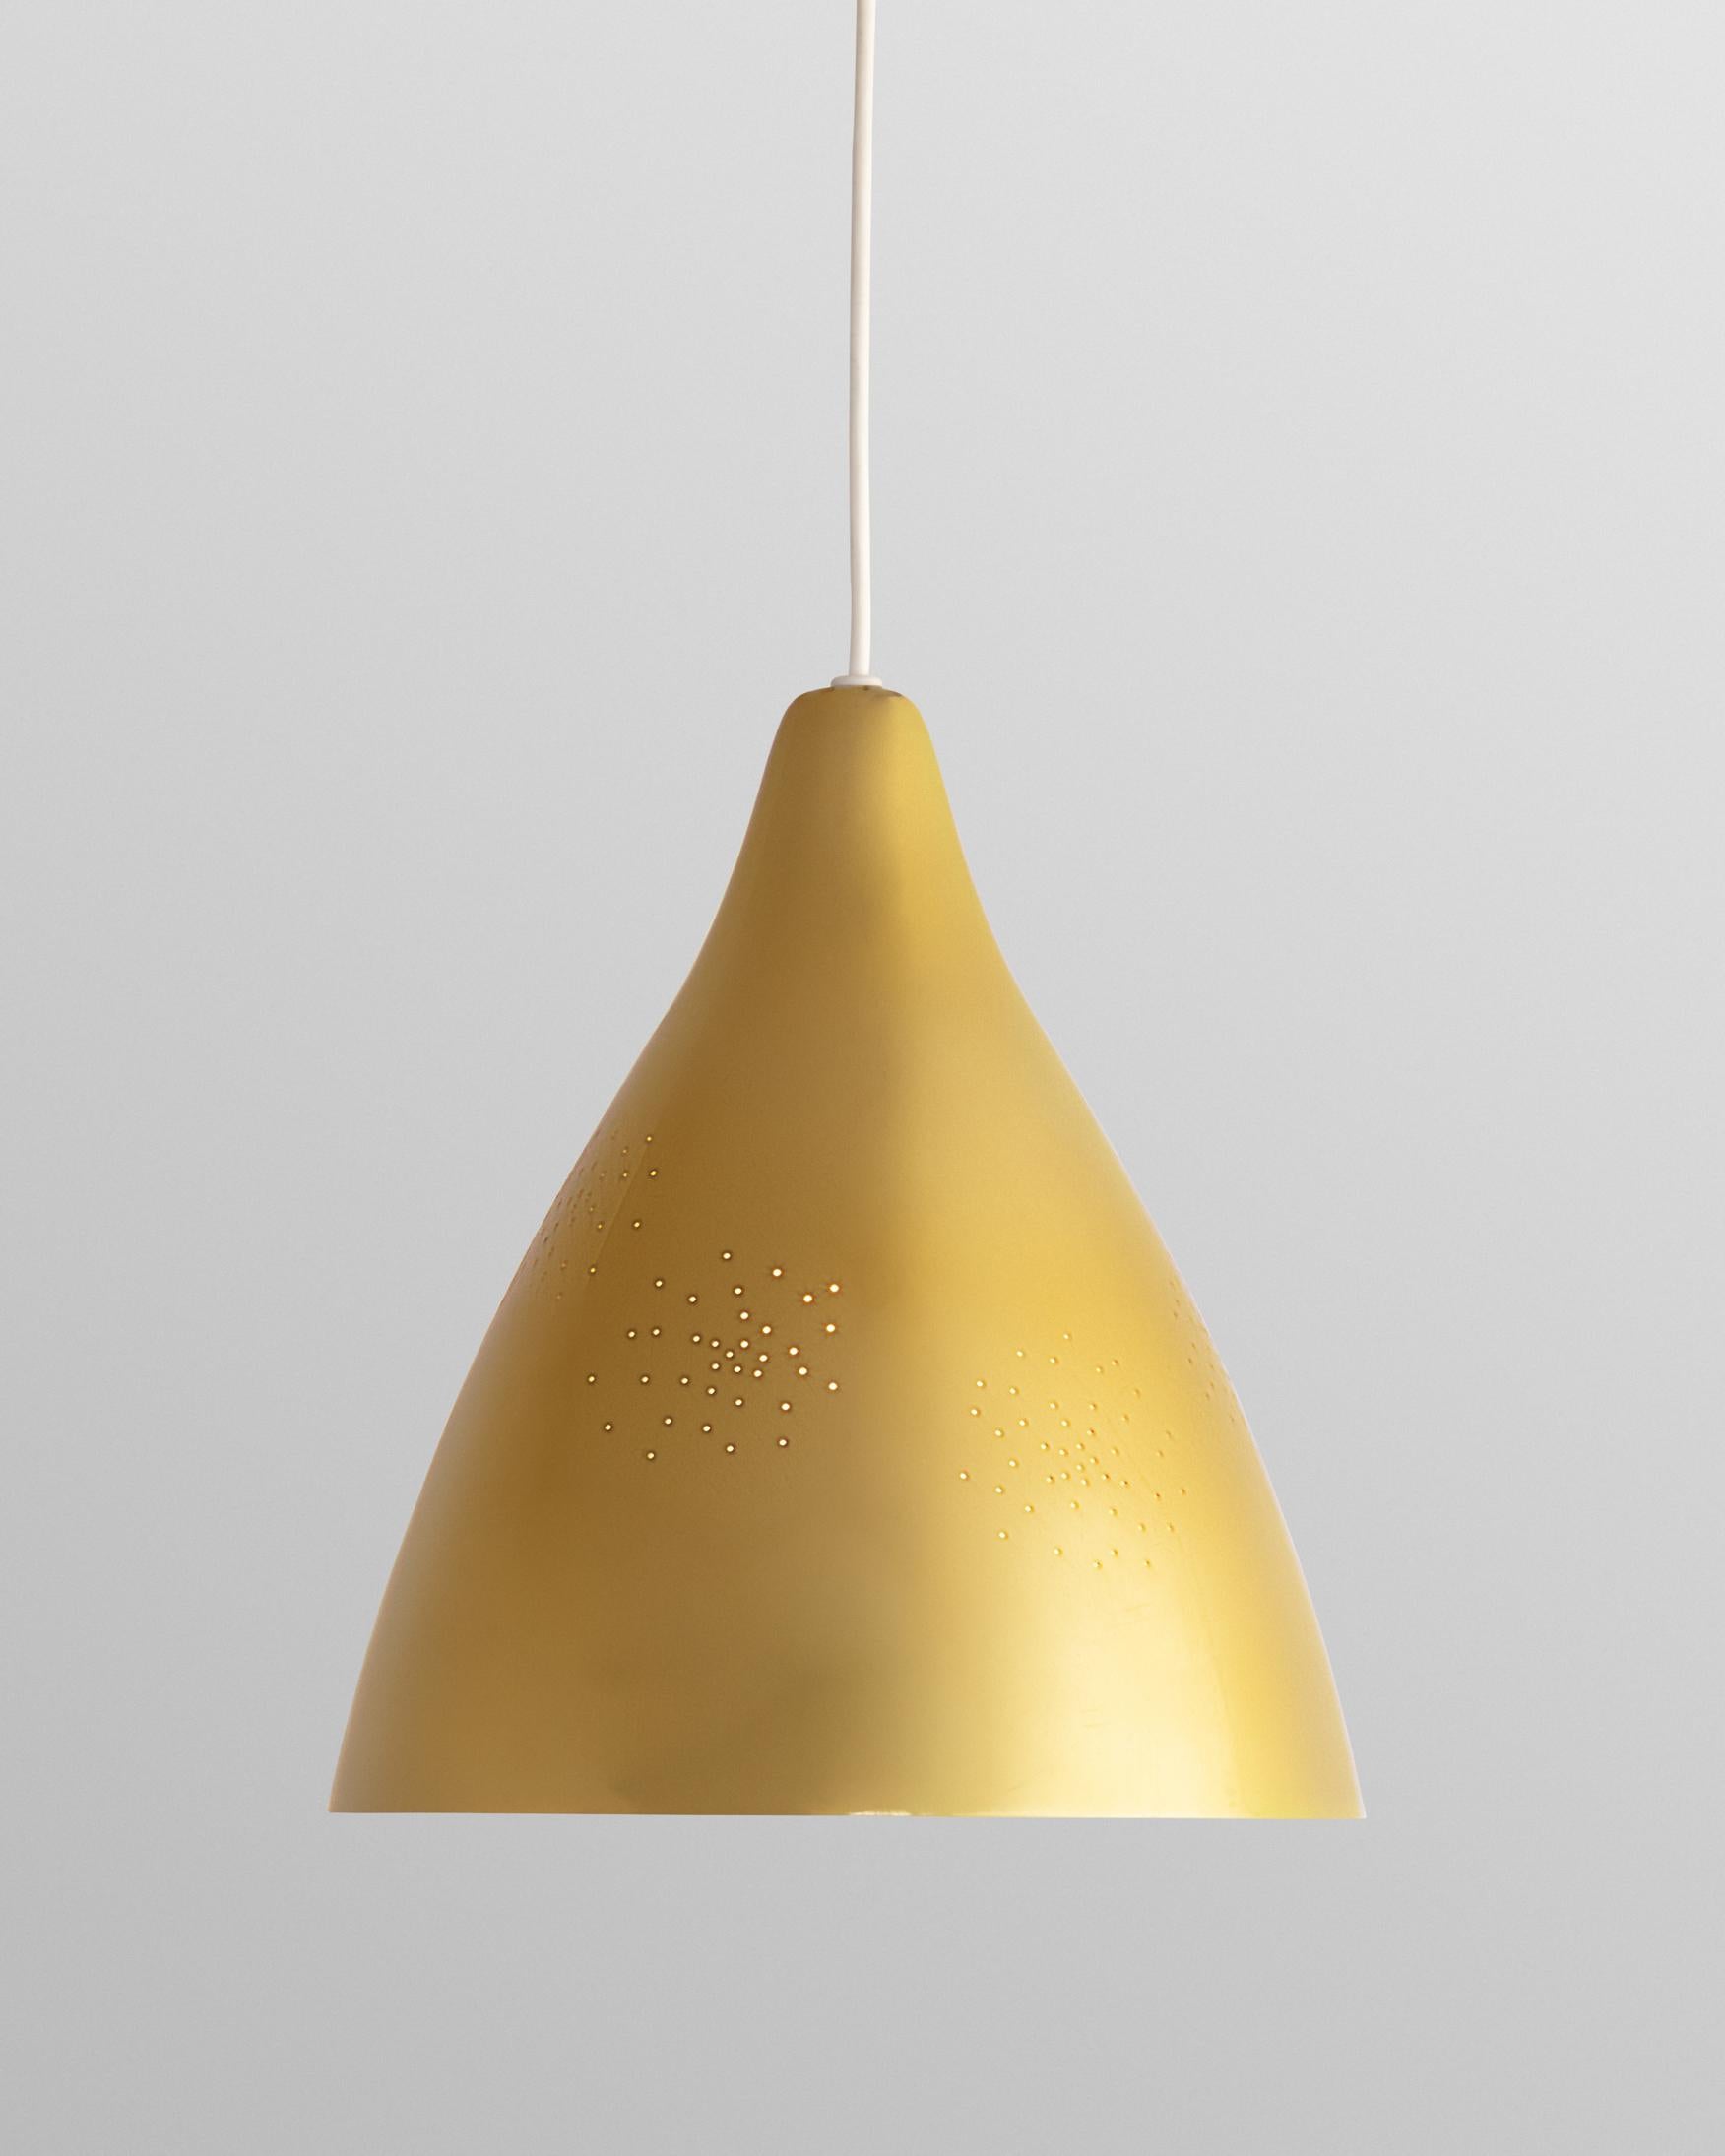 Lisa Johansson-Pape, Ceiling Light in brass-plated aluminum. Designed ca. 1950. Manufactured ca. 1980.Manufactured by Oy Stockmann-Ornö AB, Kerava, Finland.